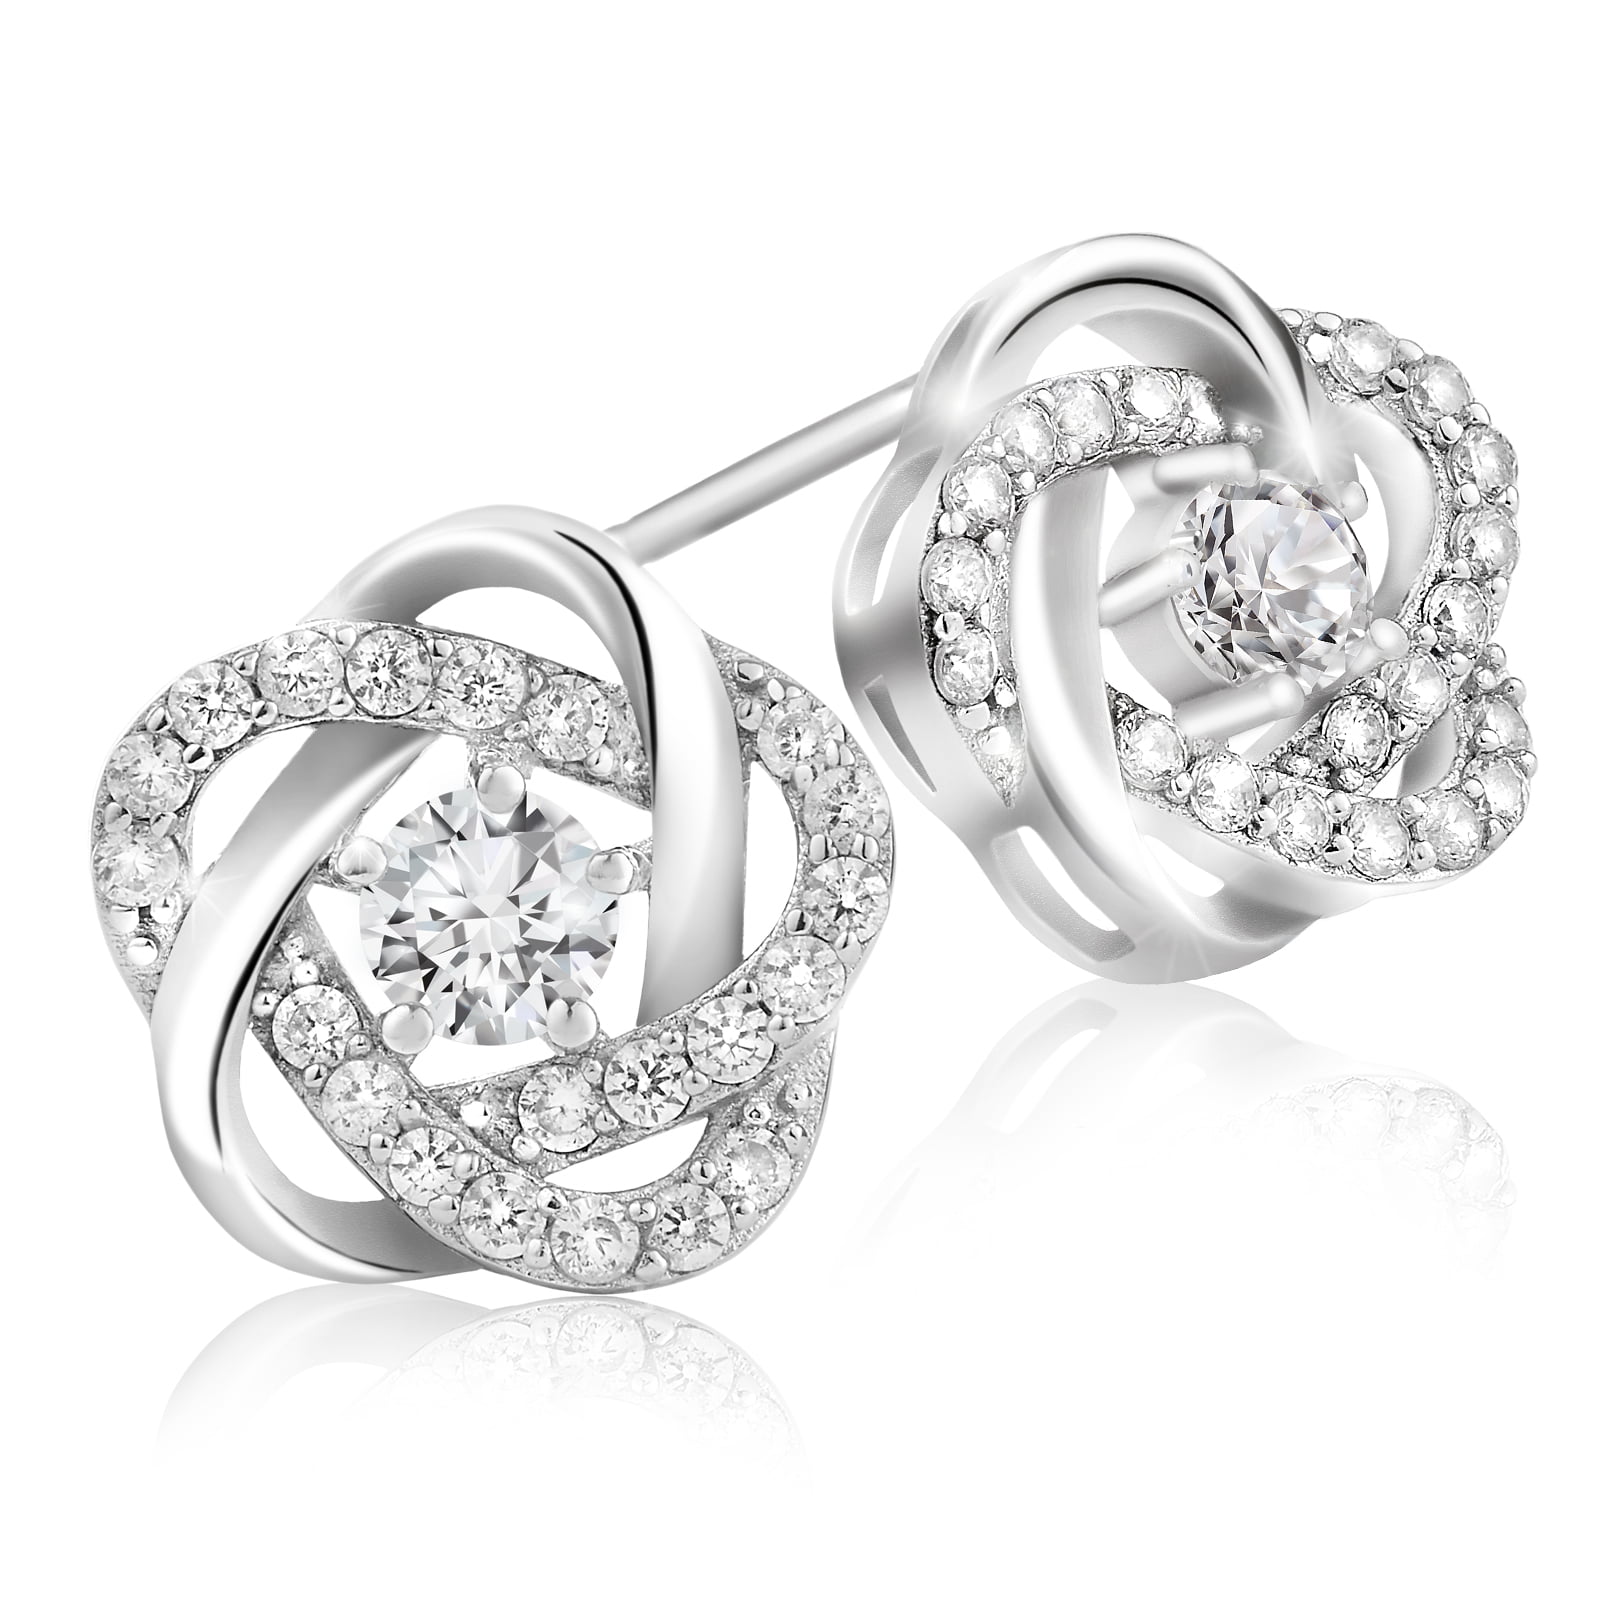 Details about   Antique Round Shape CZ Stud 925 Sterling Silver Post Earrings 